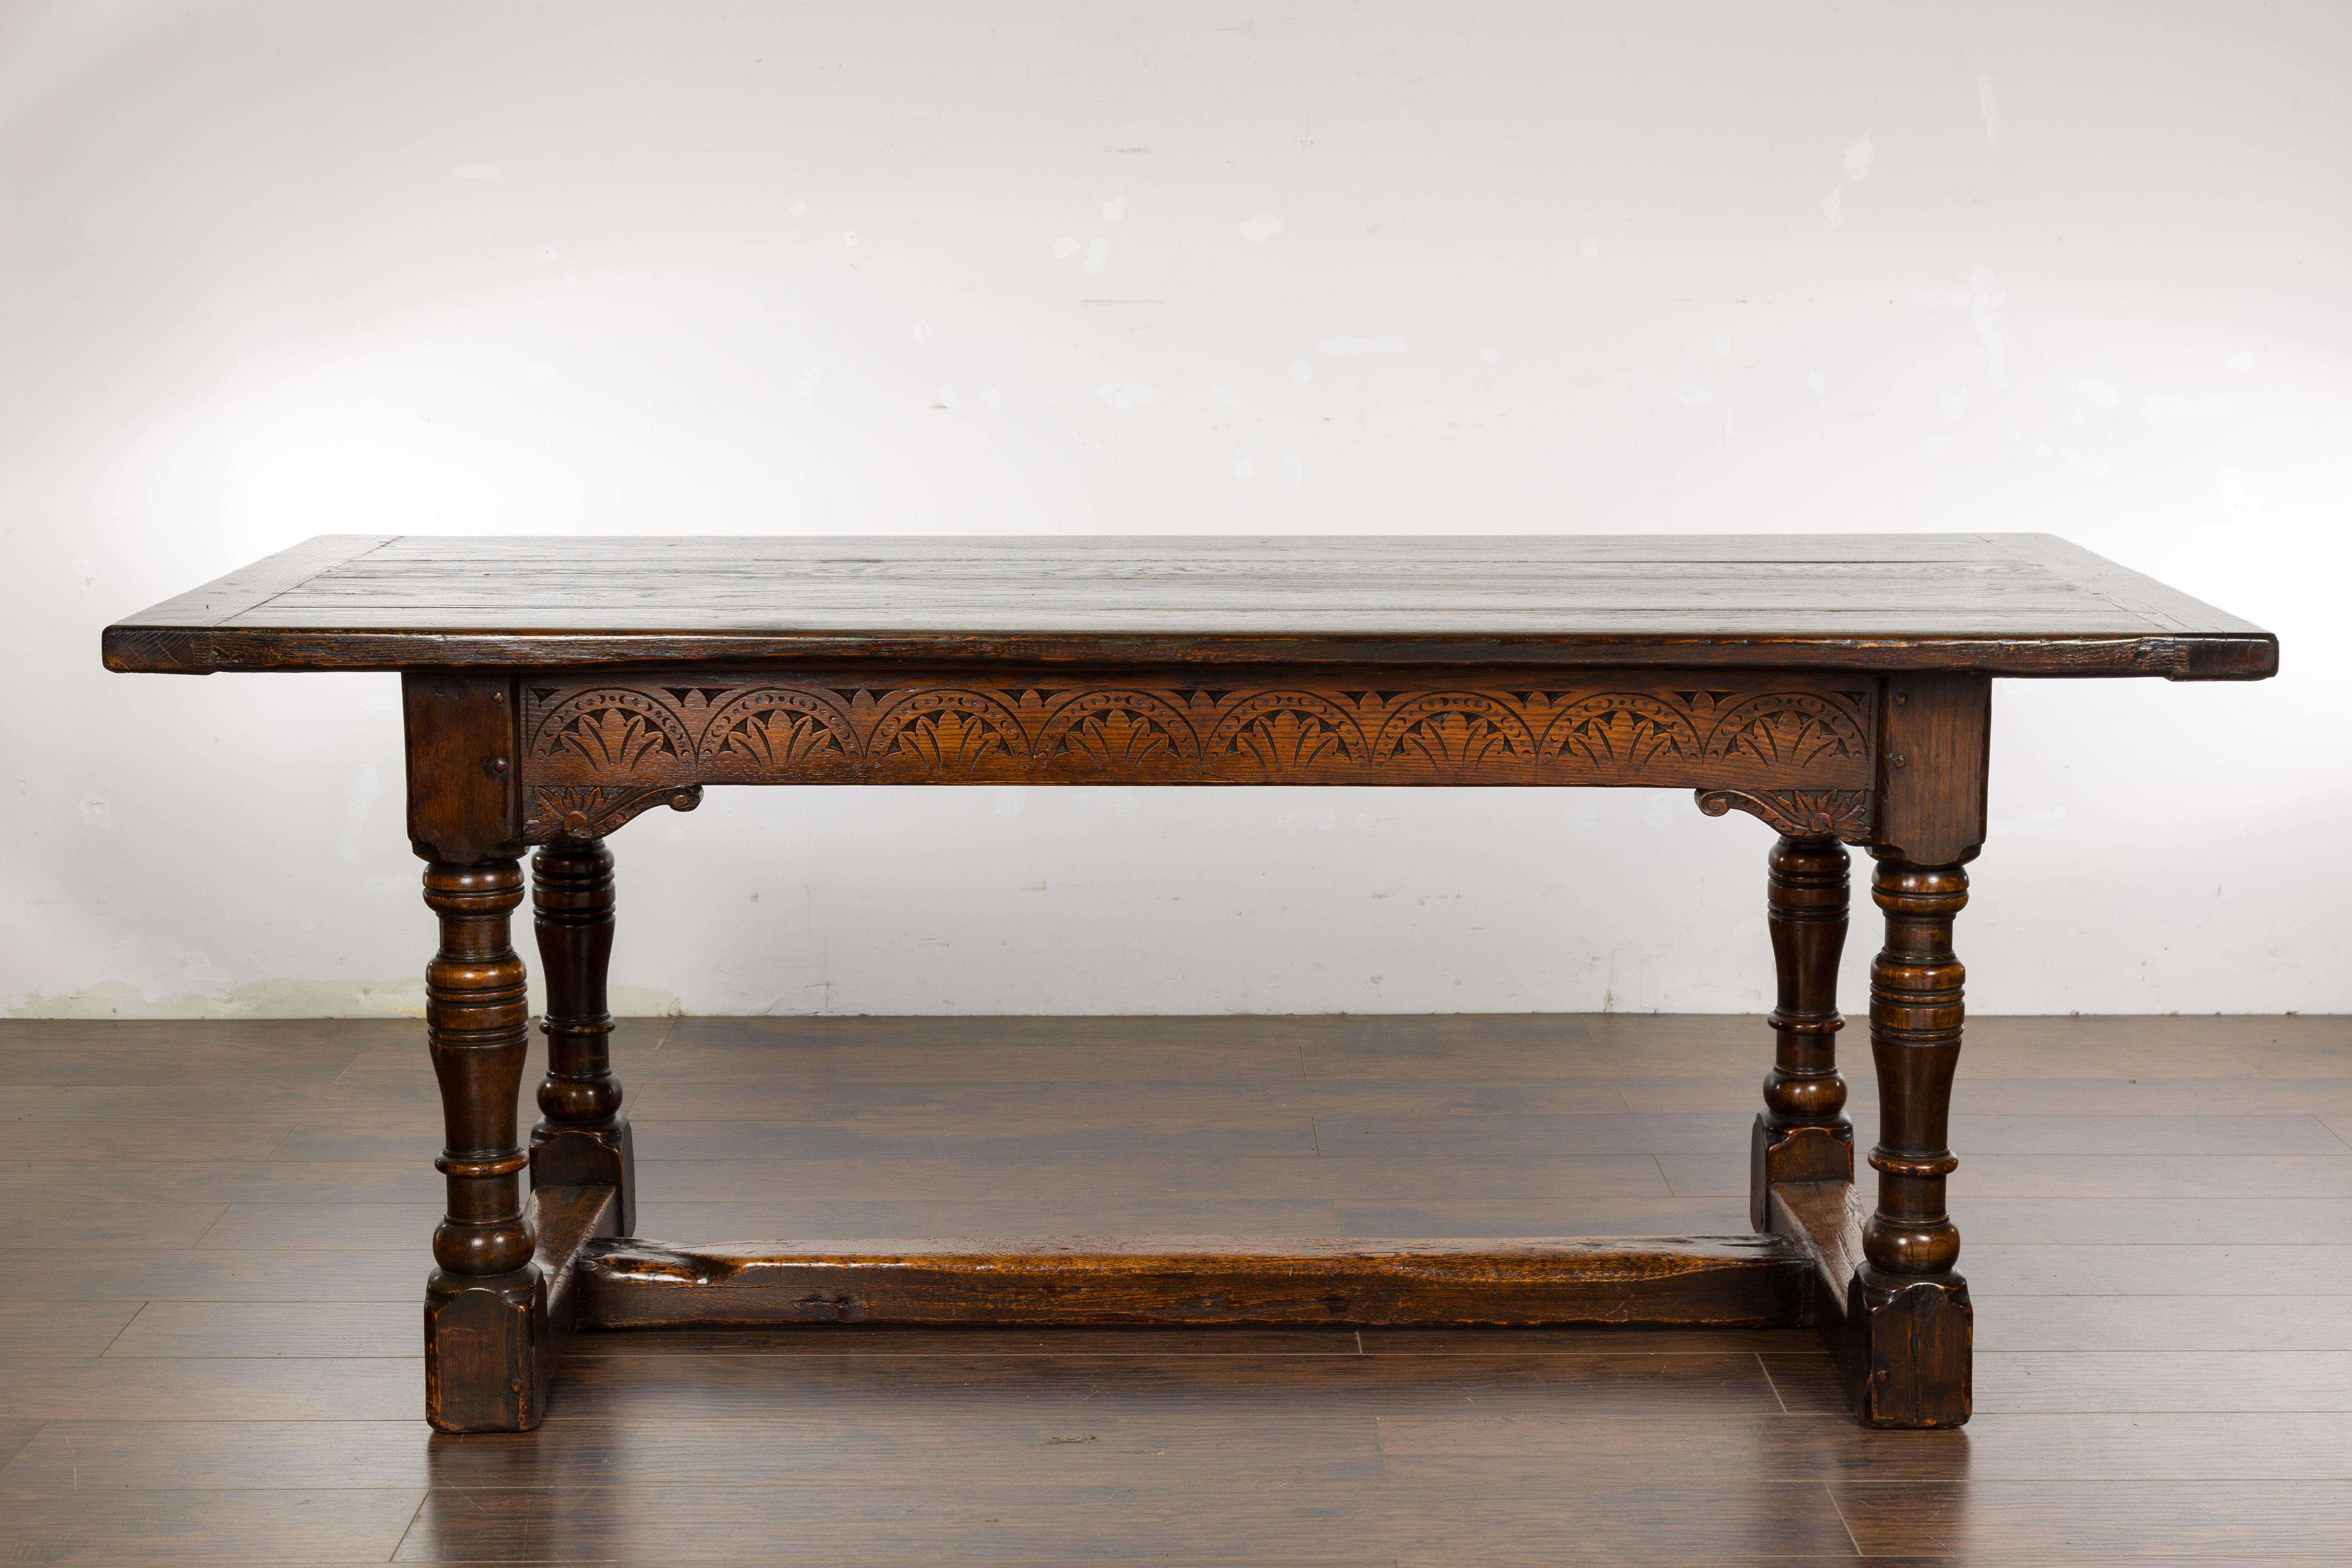 19th Century English Oak Table with Carved Apron and Turned Legs In Good Condition For Sale In Atlanta, GA